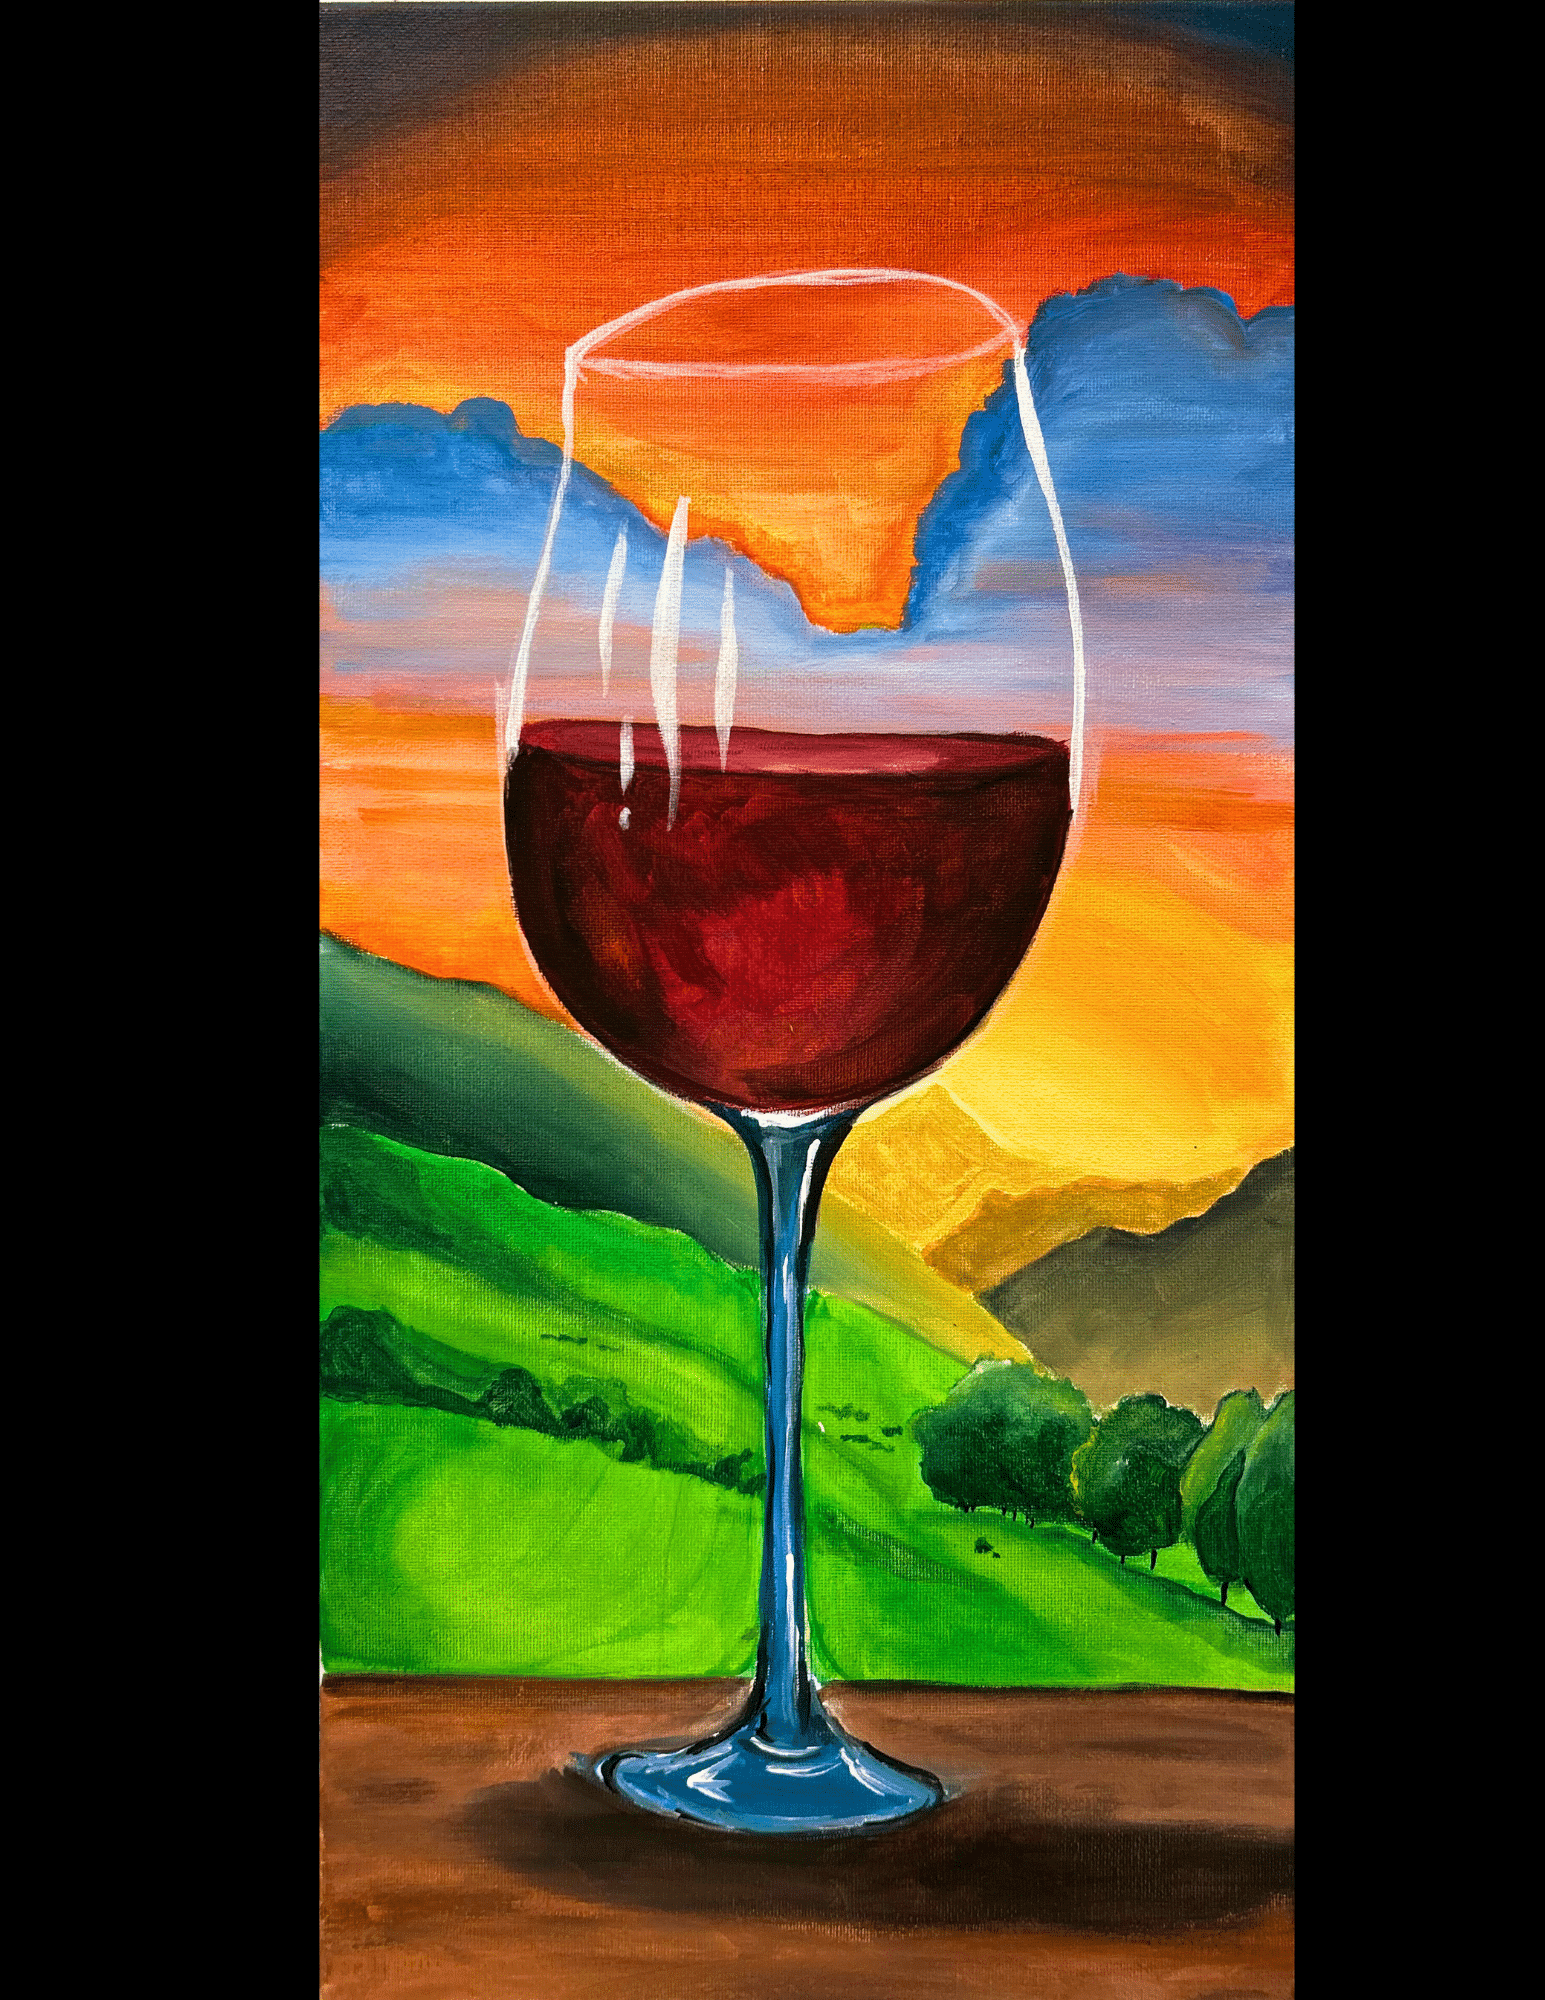 Sipping in the Sunset - NM paint and sip